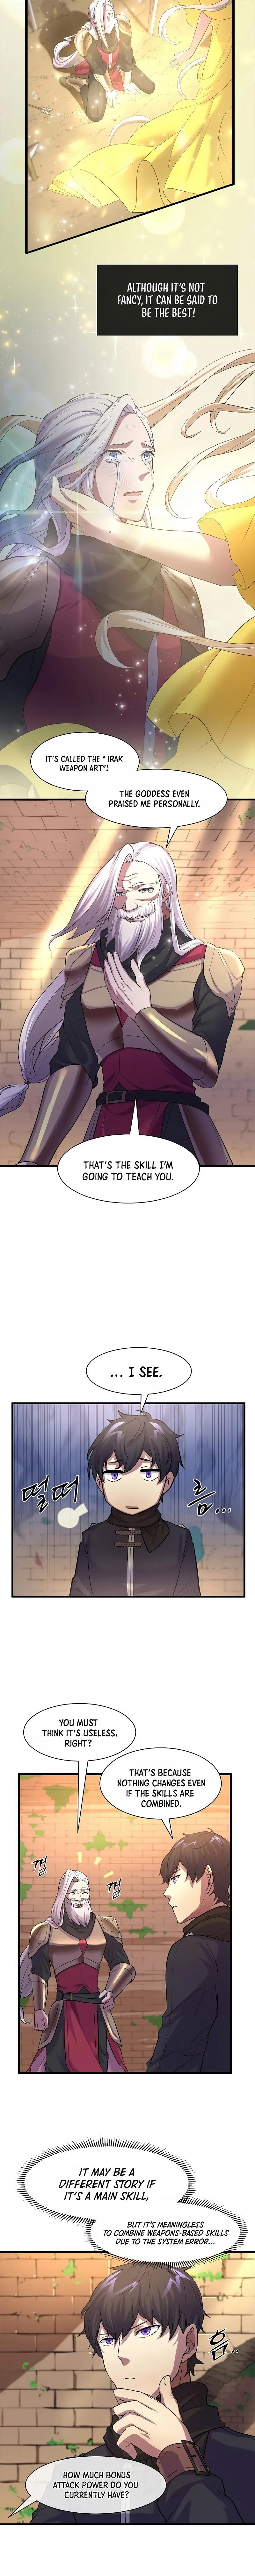 Leveling Up With Skills Chapter 11 page 3